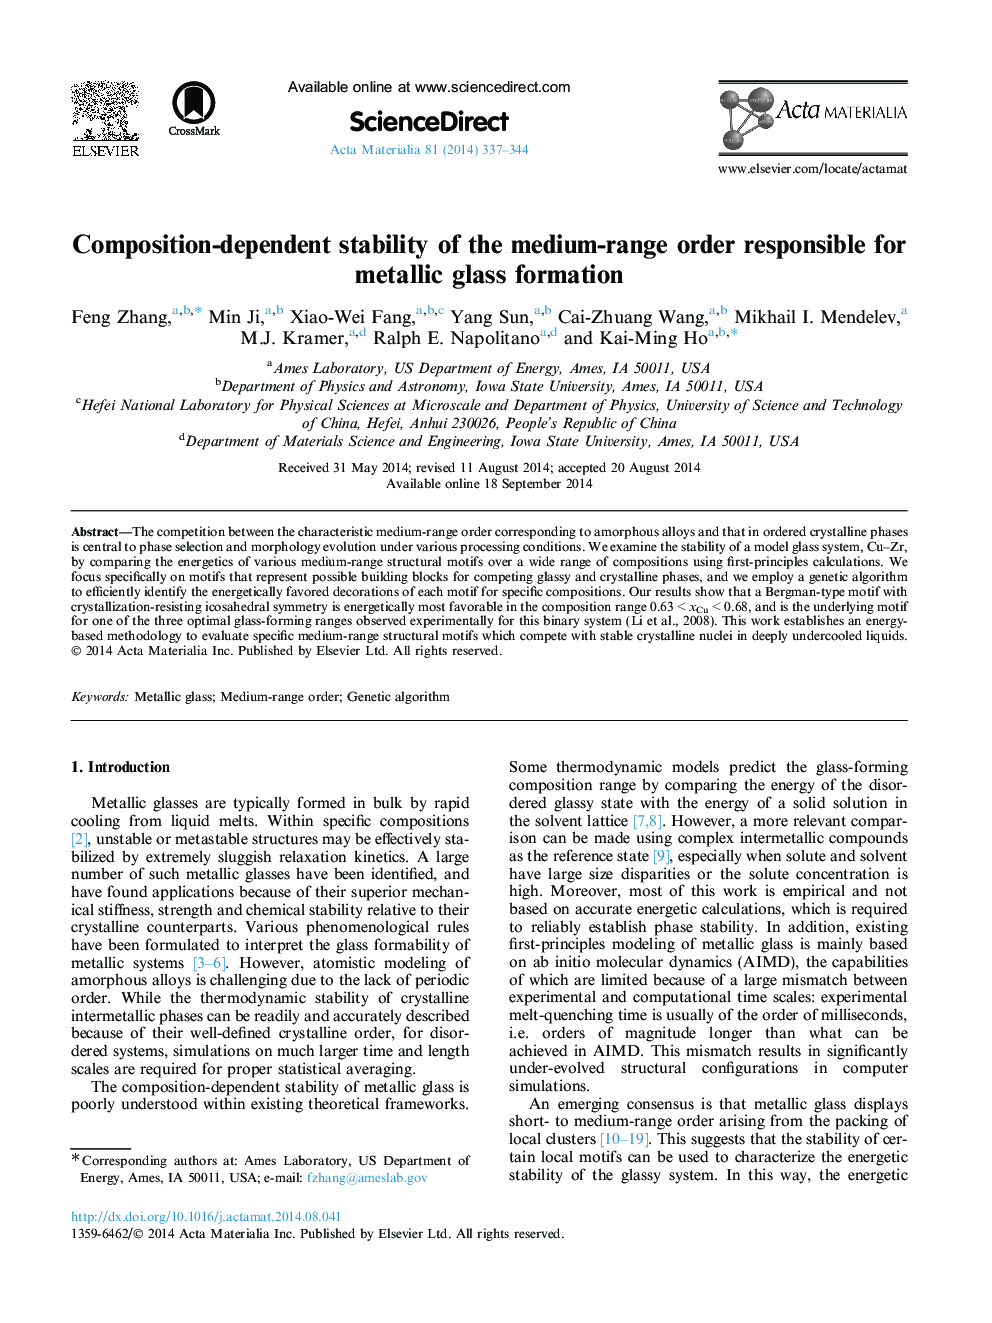 Composition-dependent stability of the medium-range order responsible for metallic glass formation